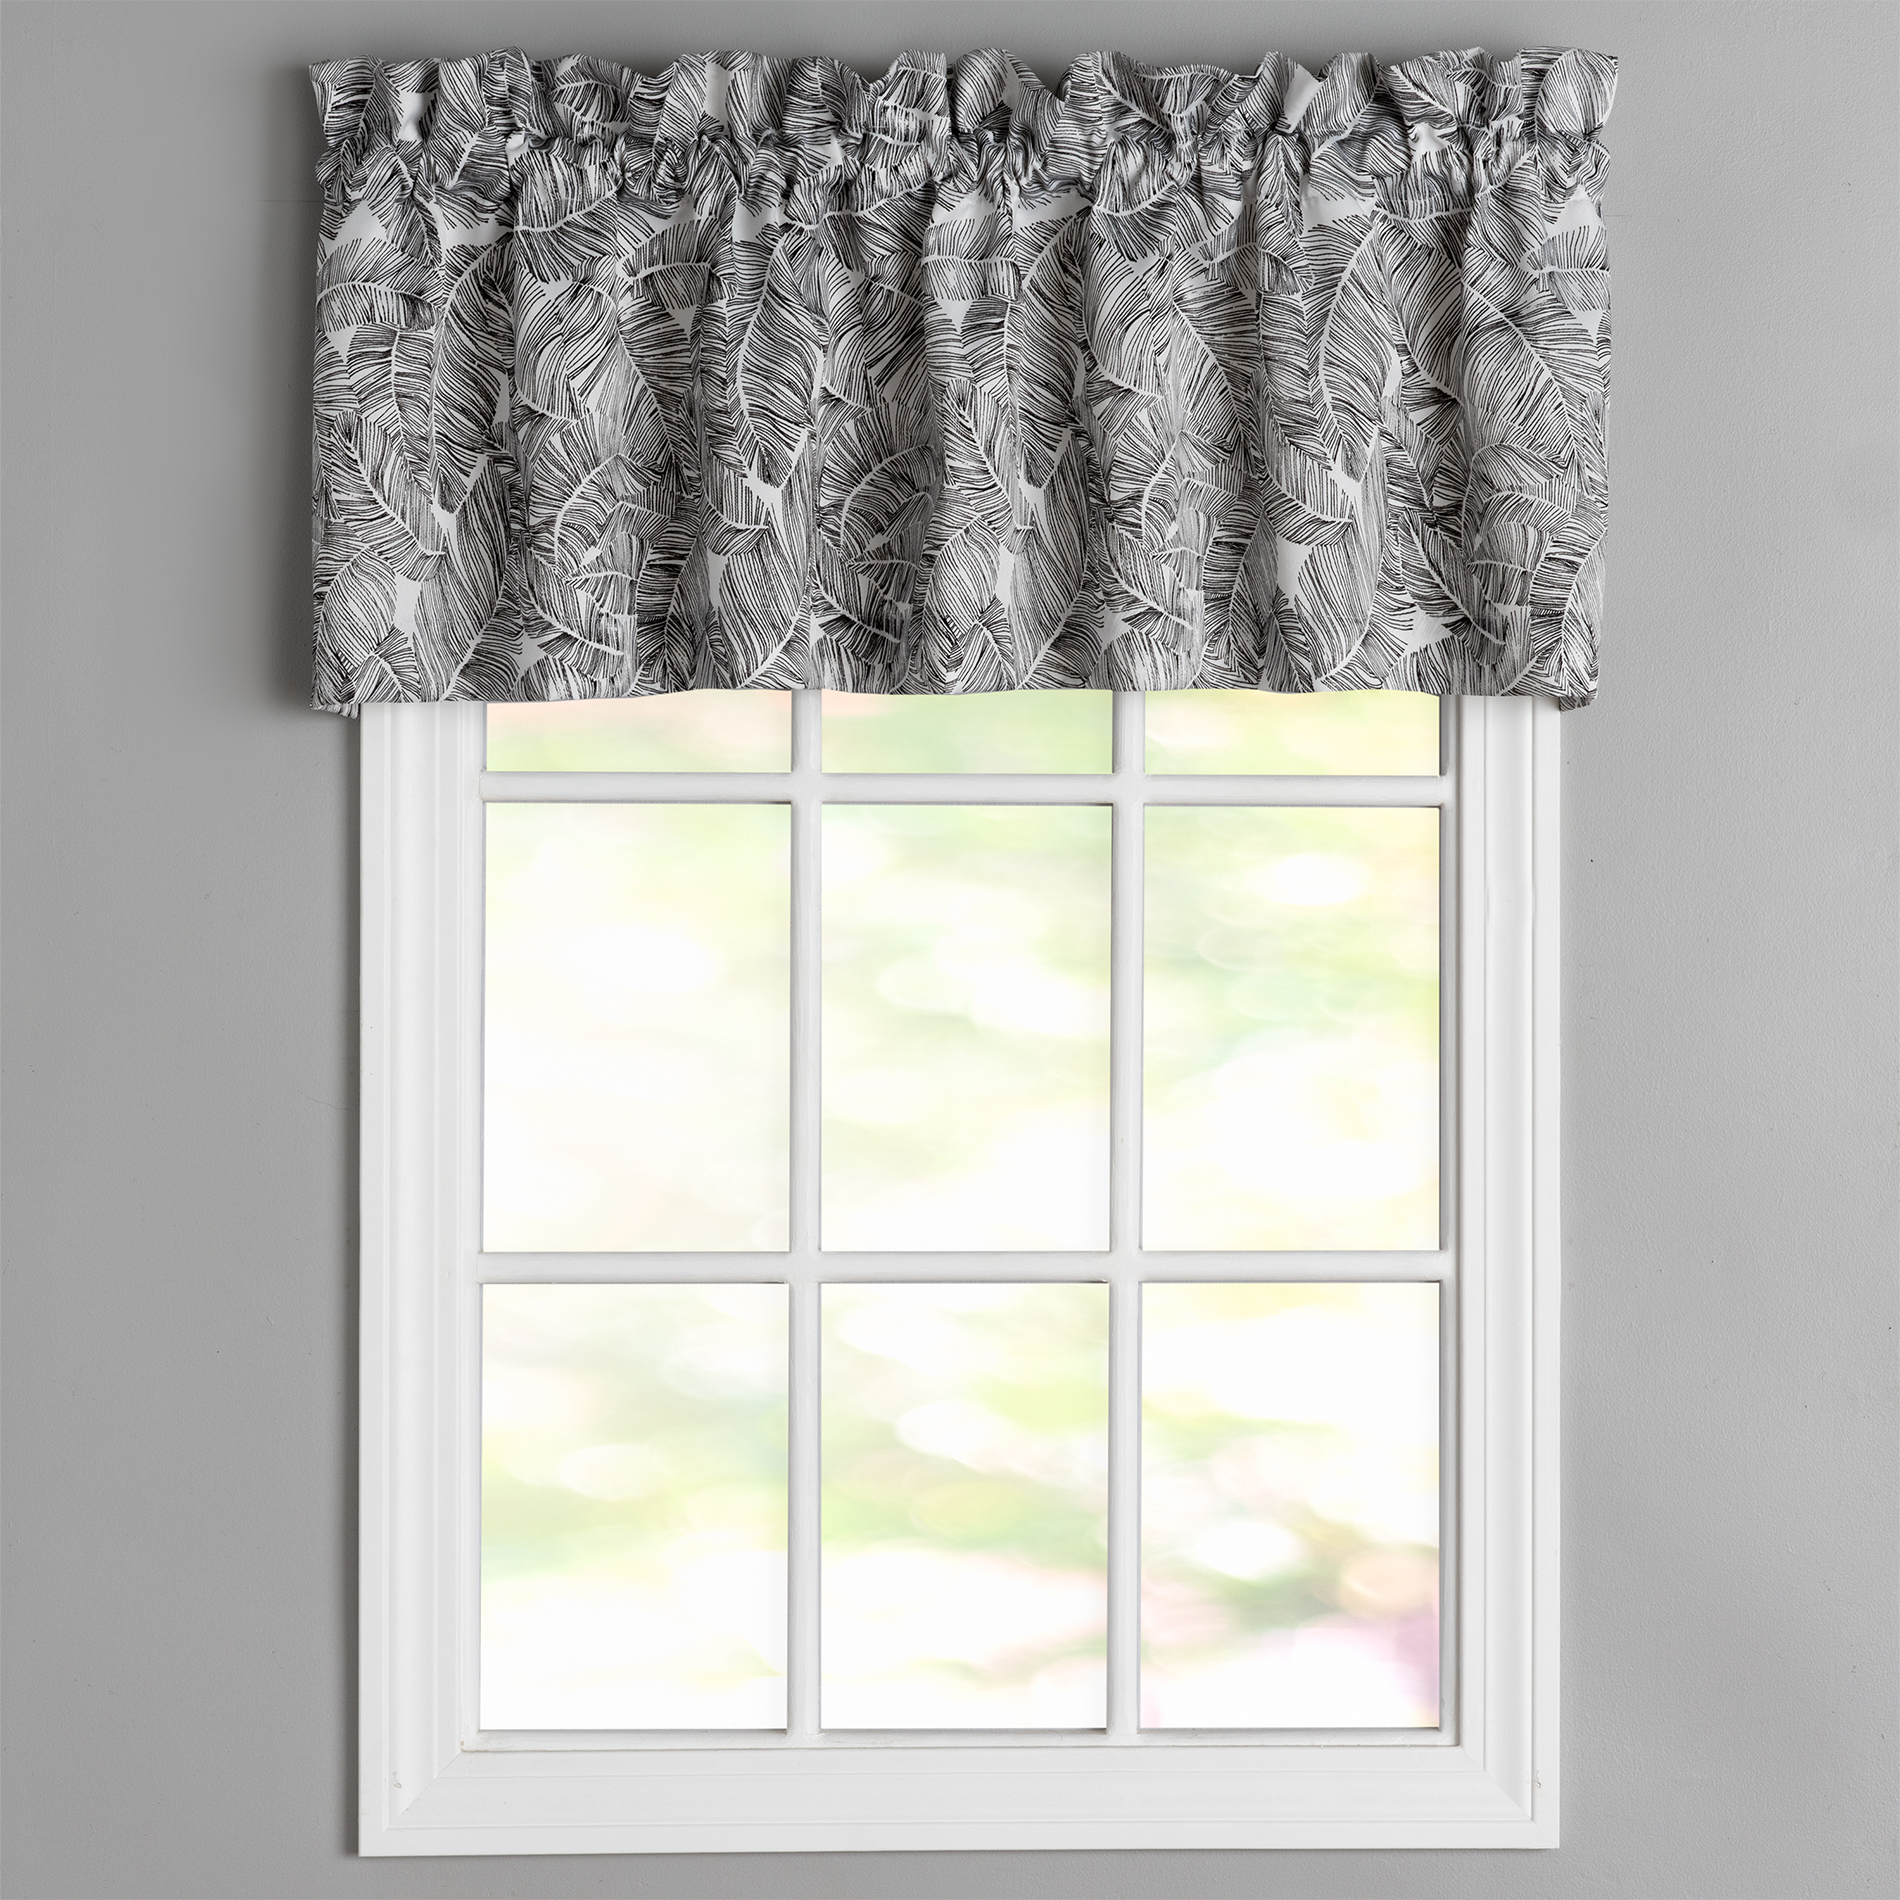 Essential Home  Mix and Match Printed Window Valance